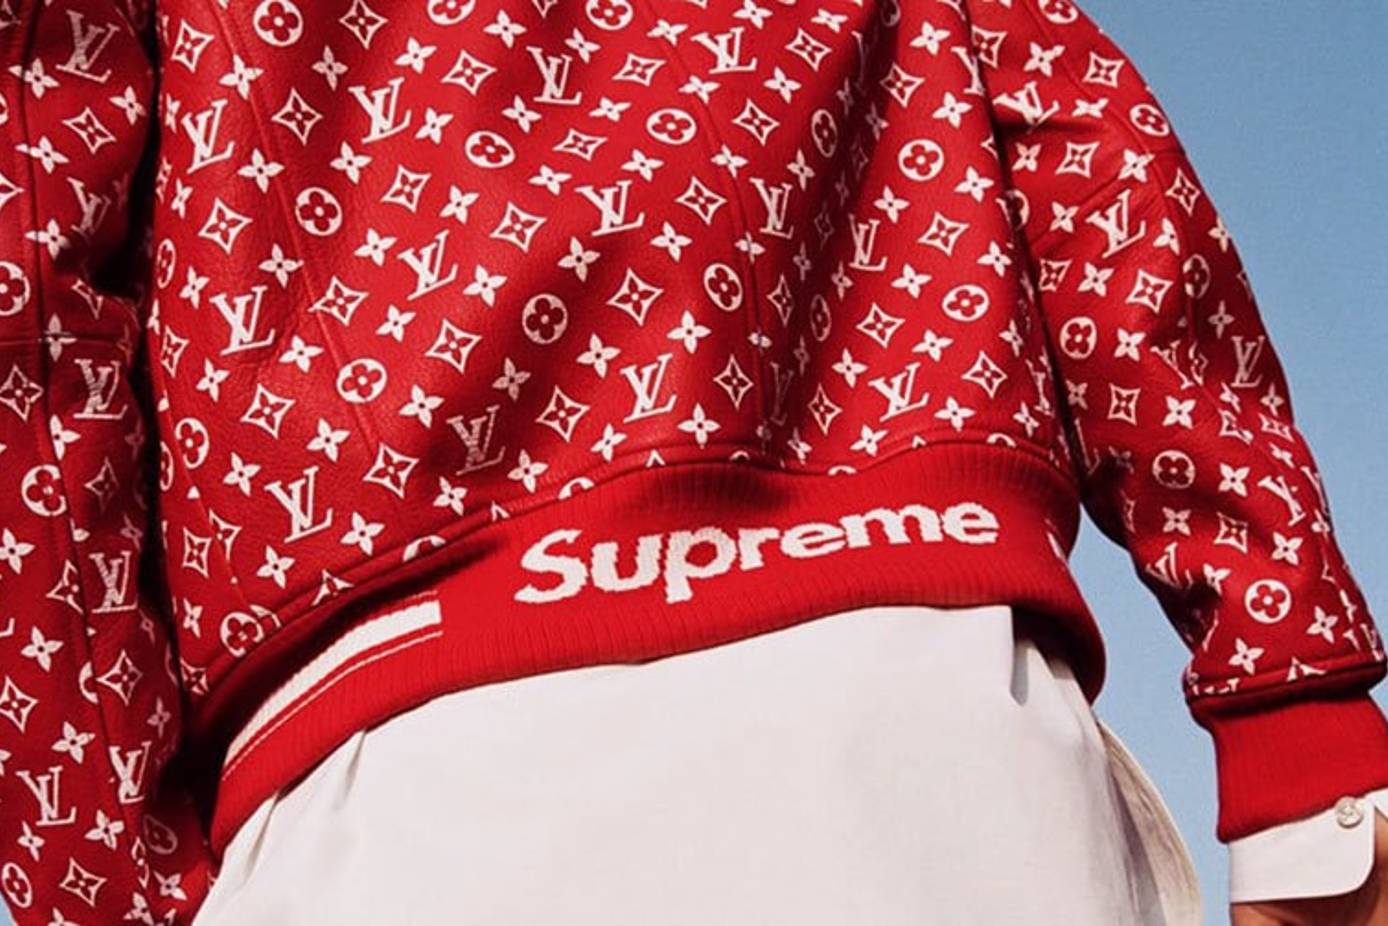 In 2000, Supreme released a Louis Vuitton-inspired set of skate